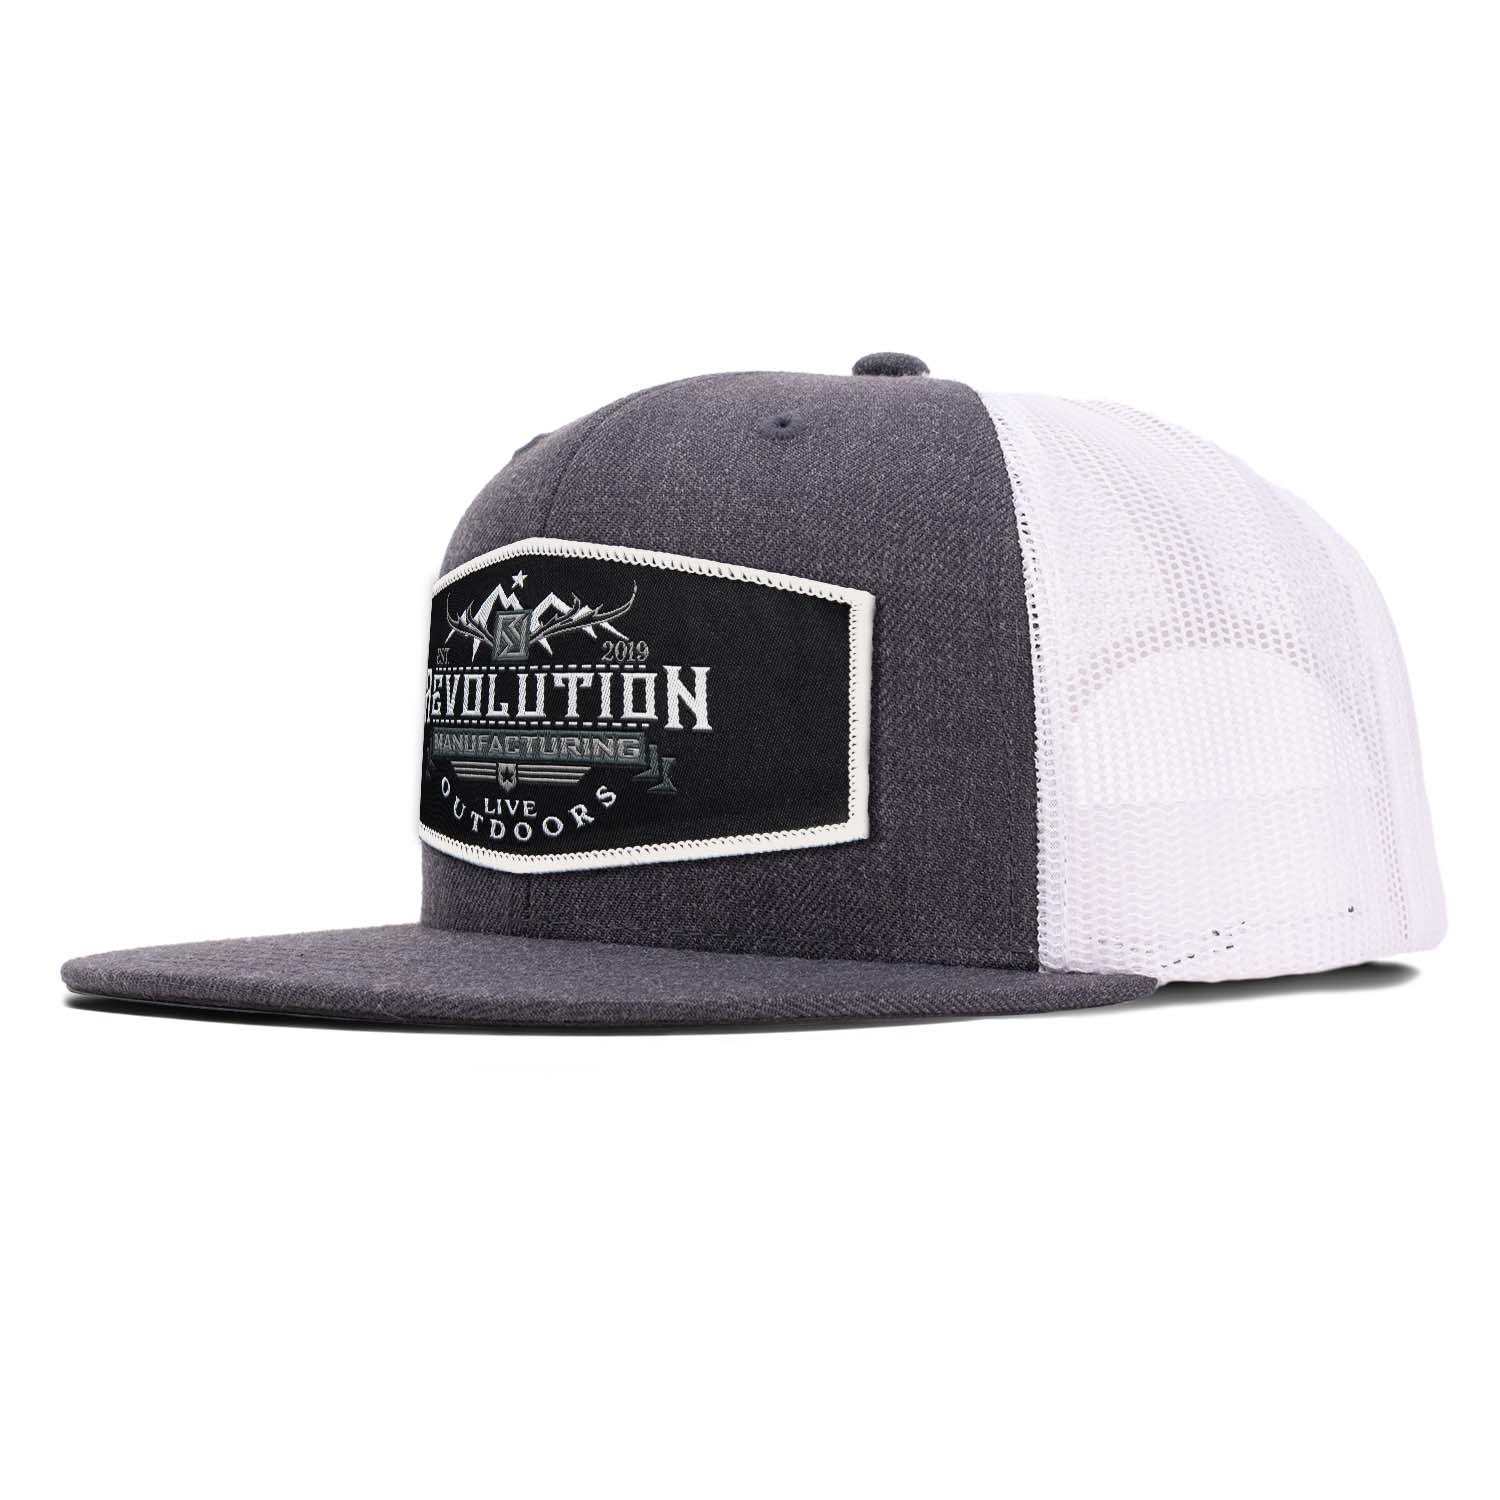 Classic flat bill trucker hat in charcoal with white mesh with a black with white border Revolution Mfg Live Outdoors woven patch